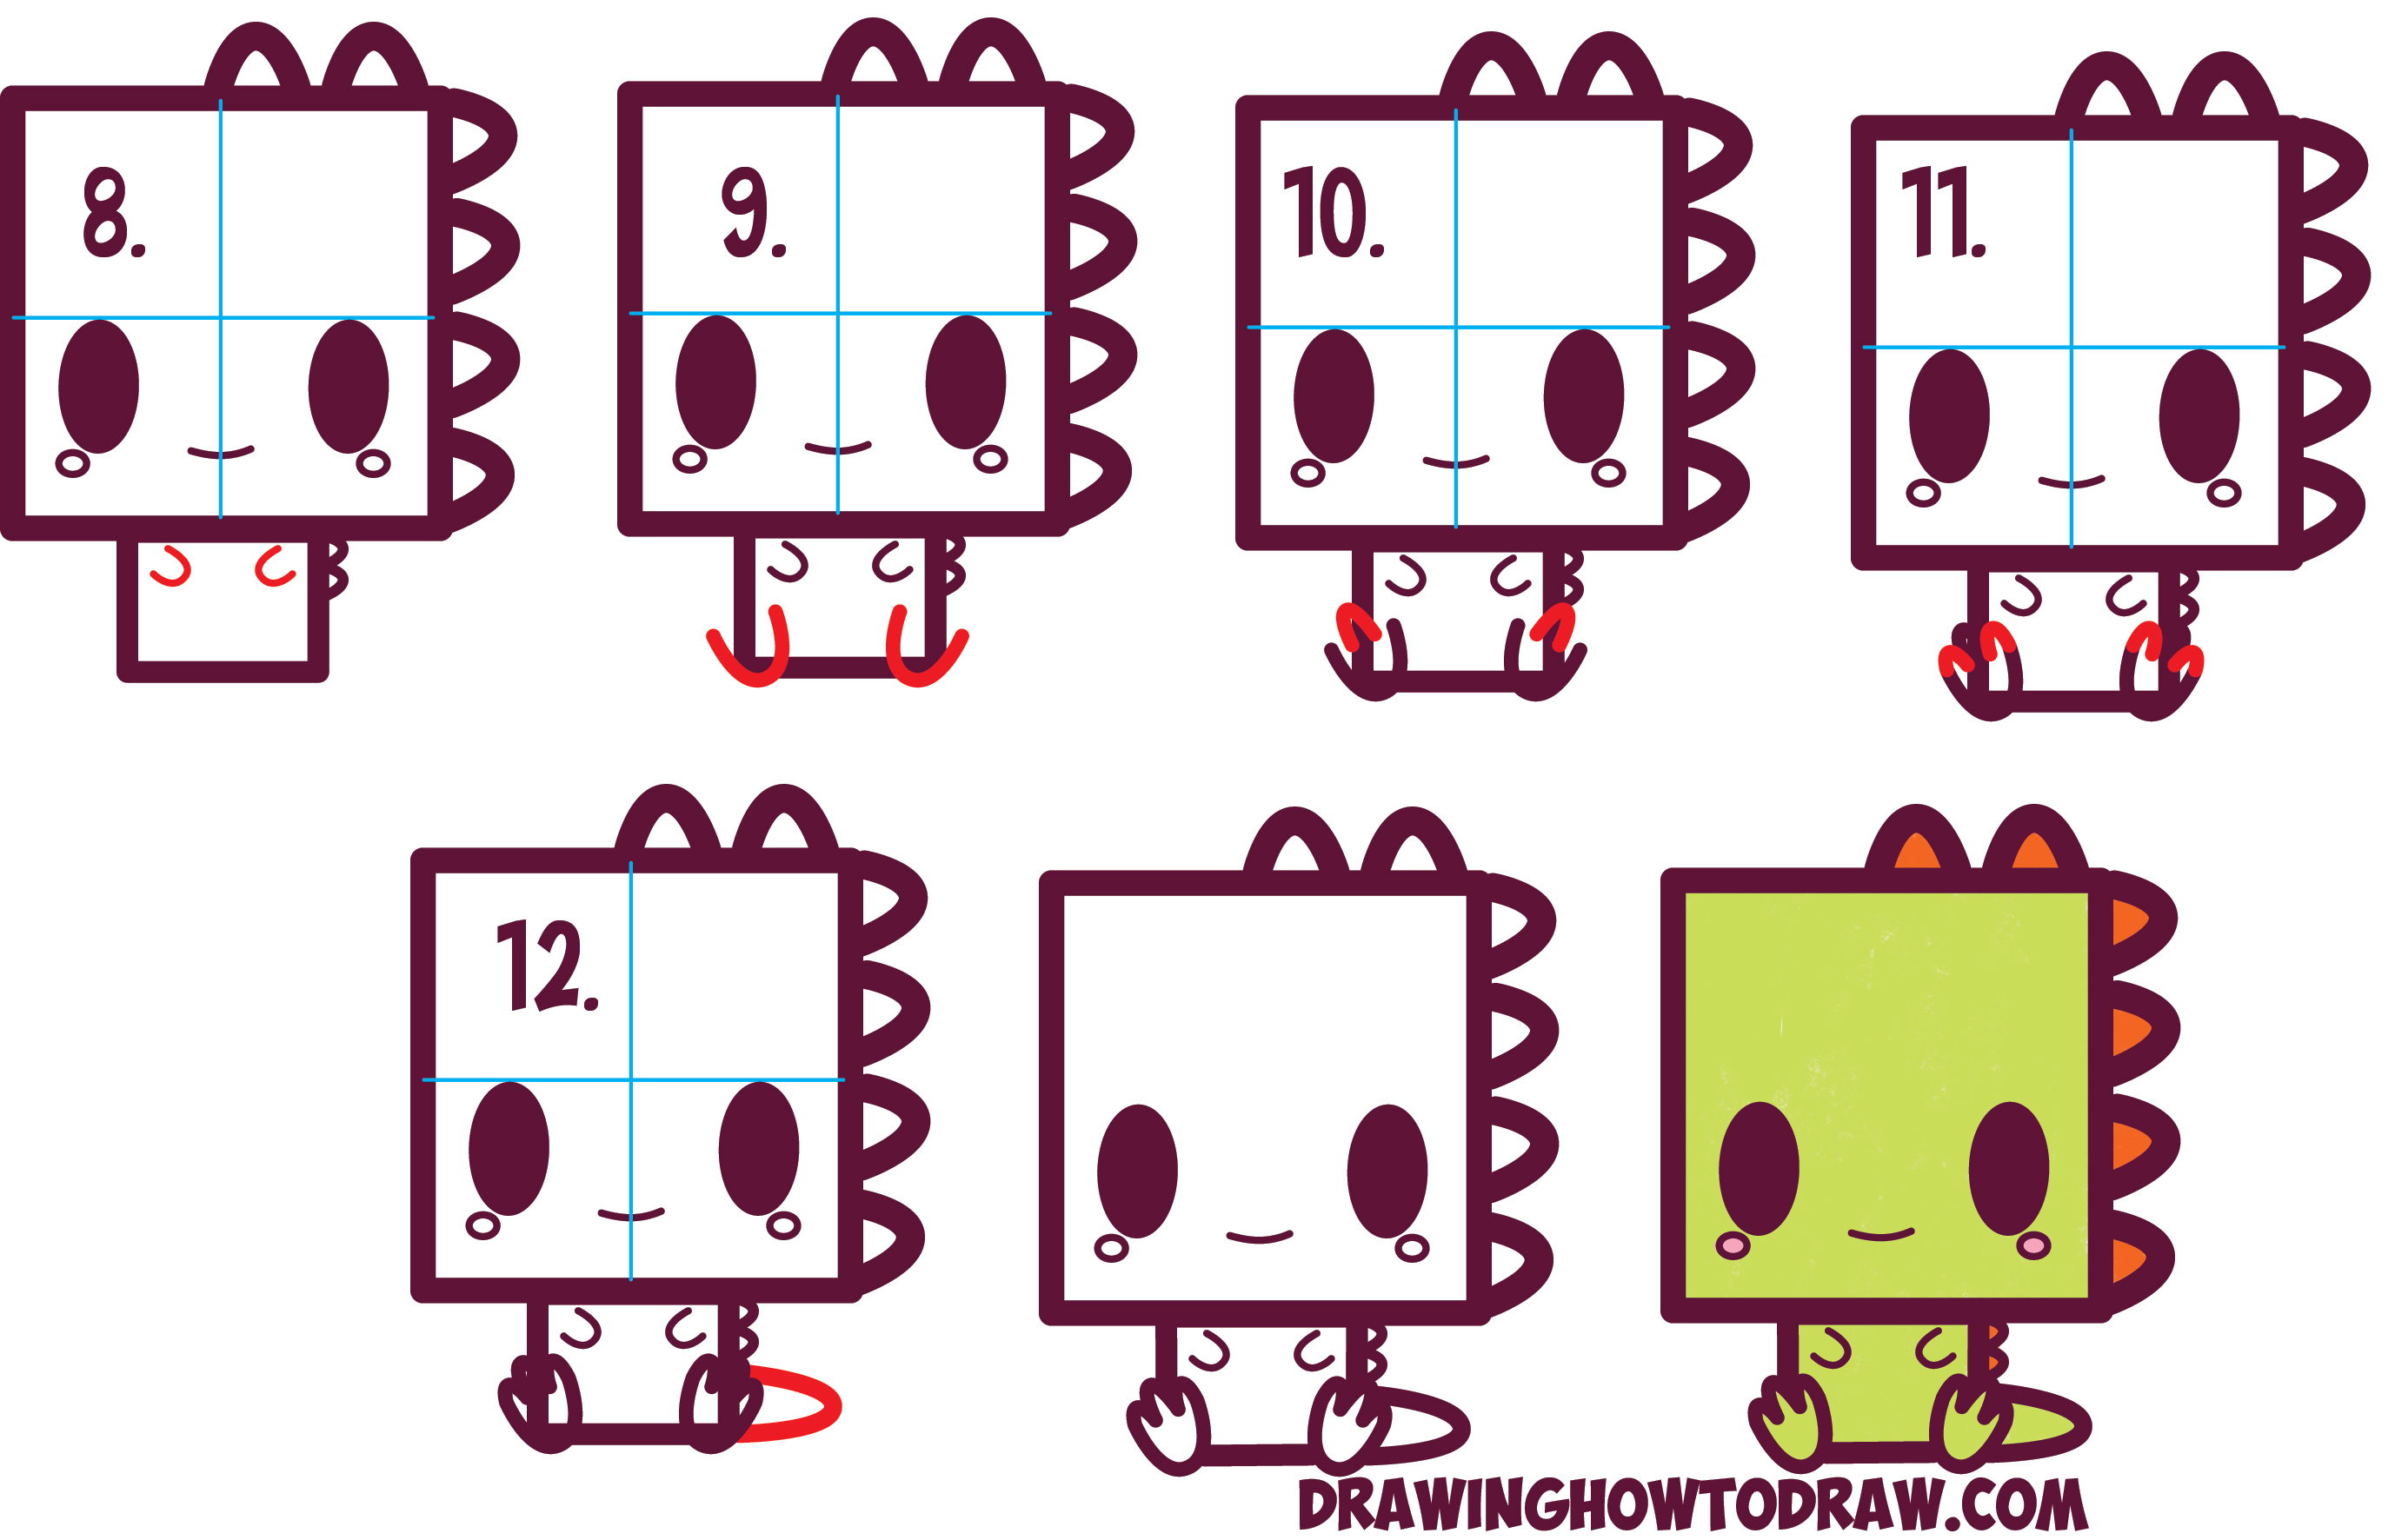 How to Draw Cute / Kawaii / Cartoon Baby Dinosaur from Squares with